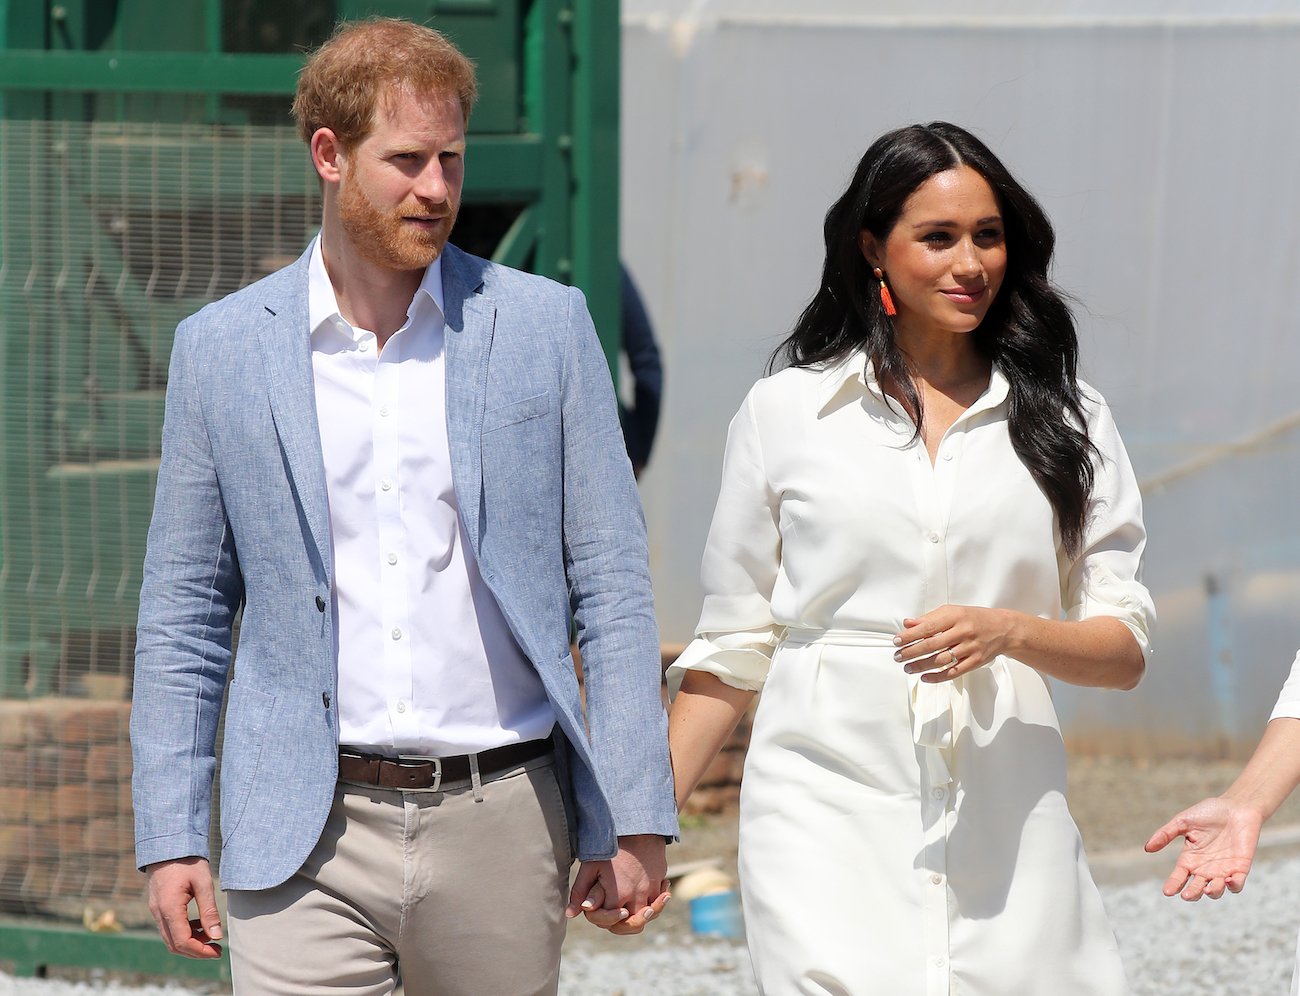 Prince Harry and Meghan Markle’s ‘Woke’ and ‘Victimhood’ Messaging Will Impact Their Popularity, Expert Says